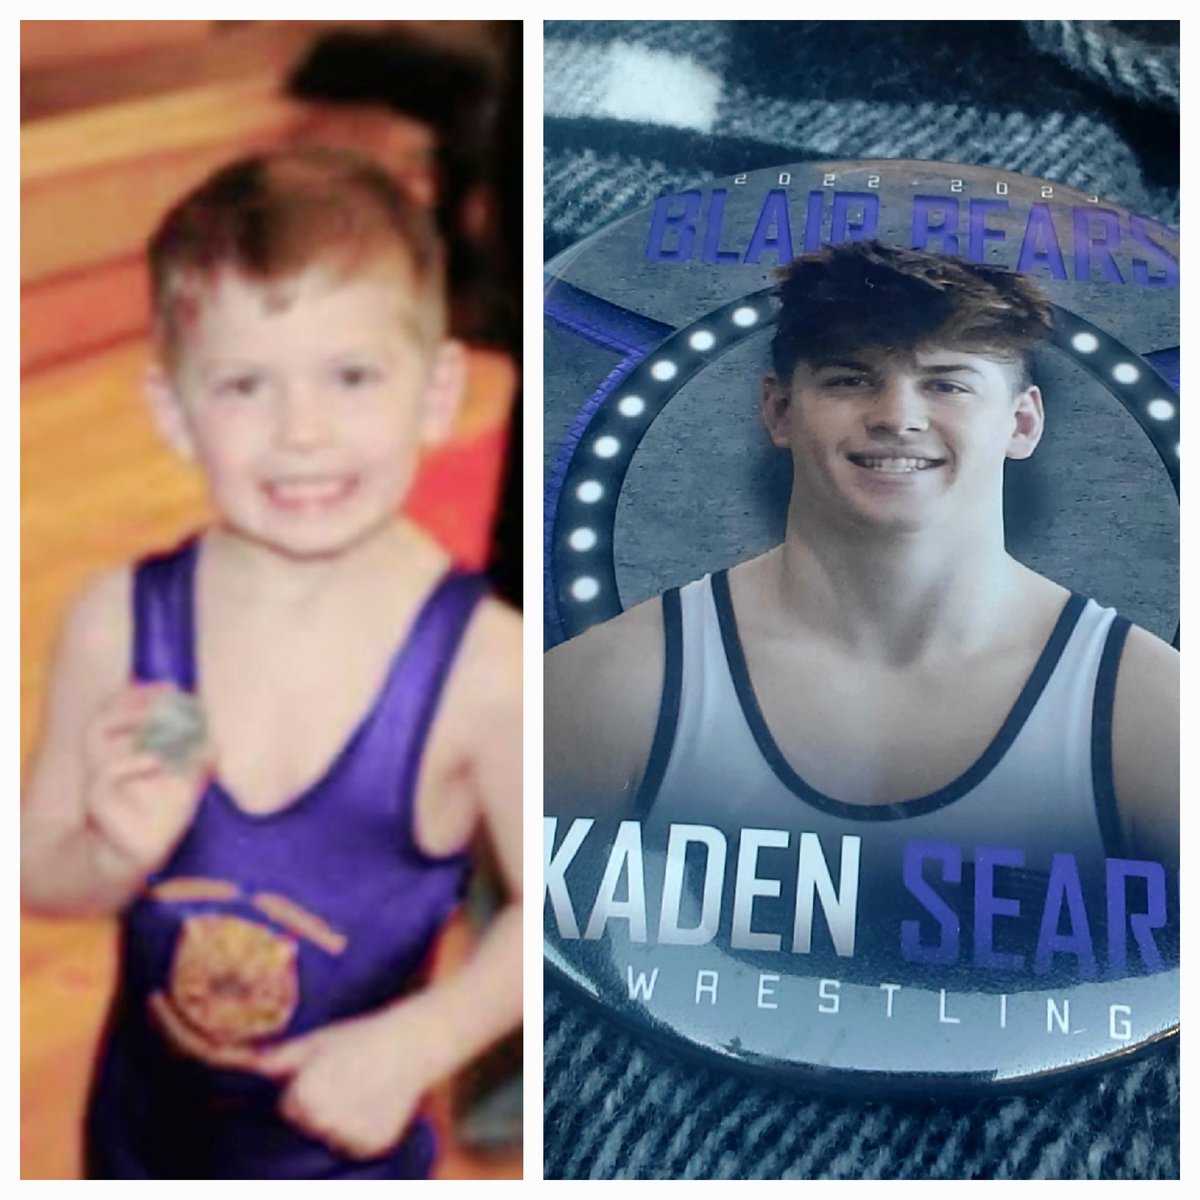 Good Luck @searskaden33 at Districts! We have been your biggest fans from the beginning! #blairbears